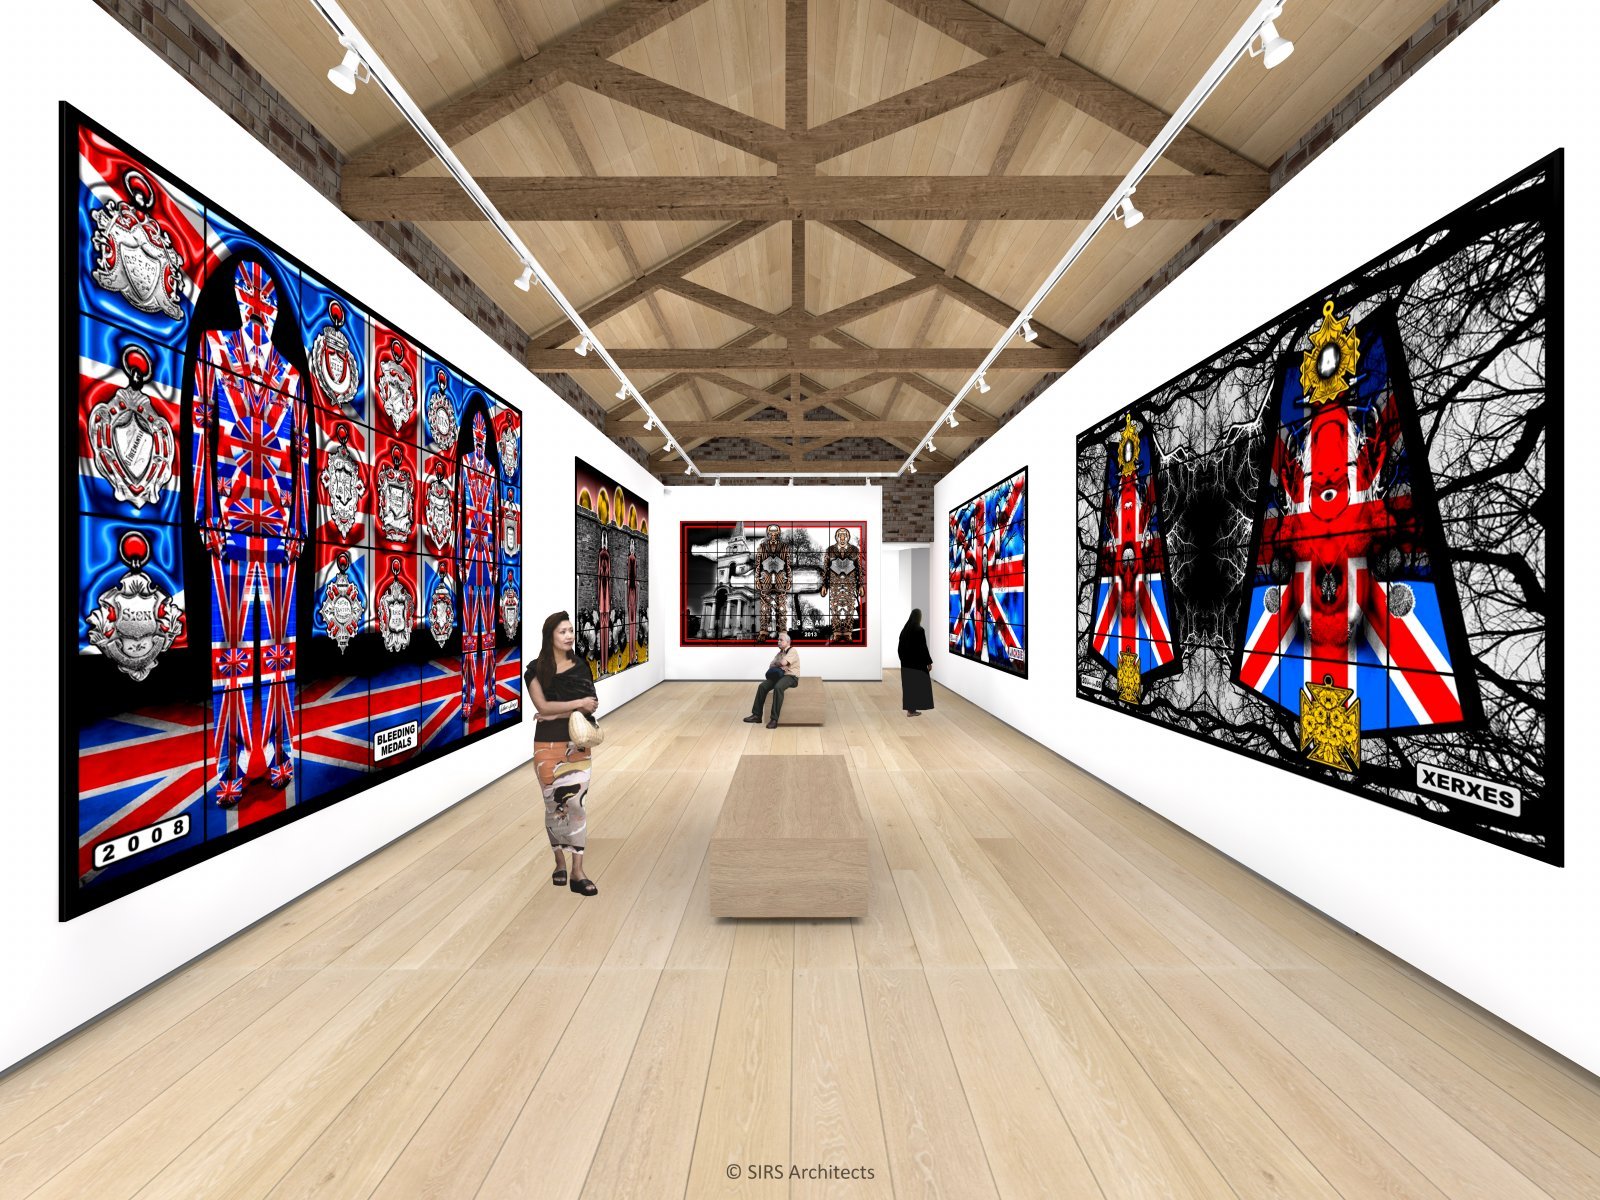 4-© SIRS Architects-The Gilbert and George Centre - 1st Floor Exhibition Space.jpg